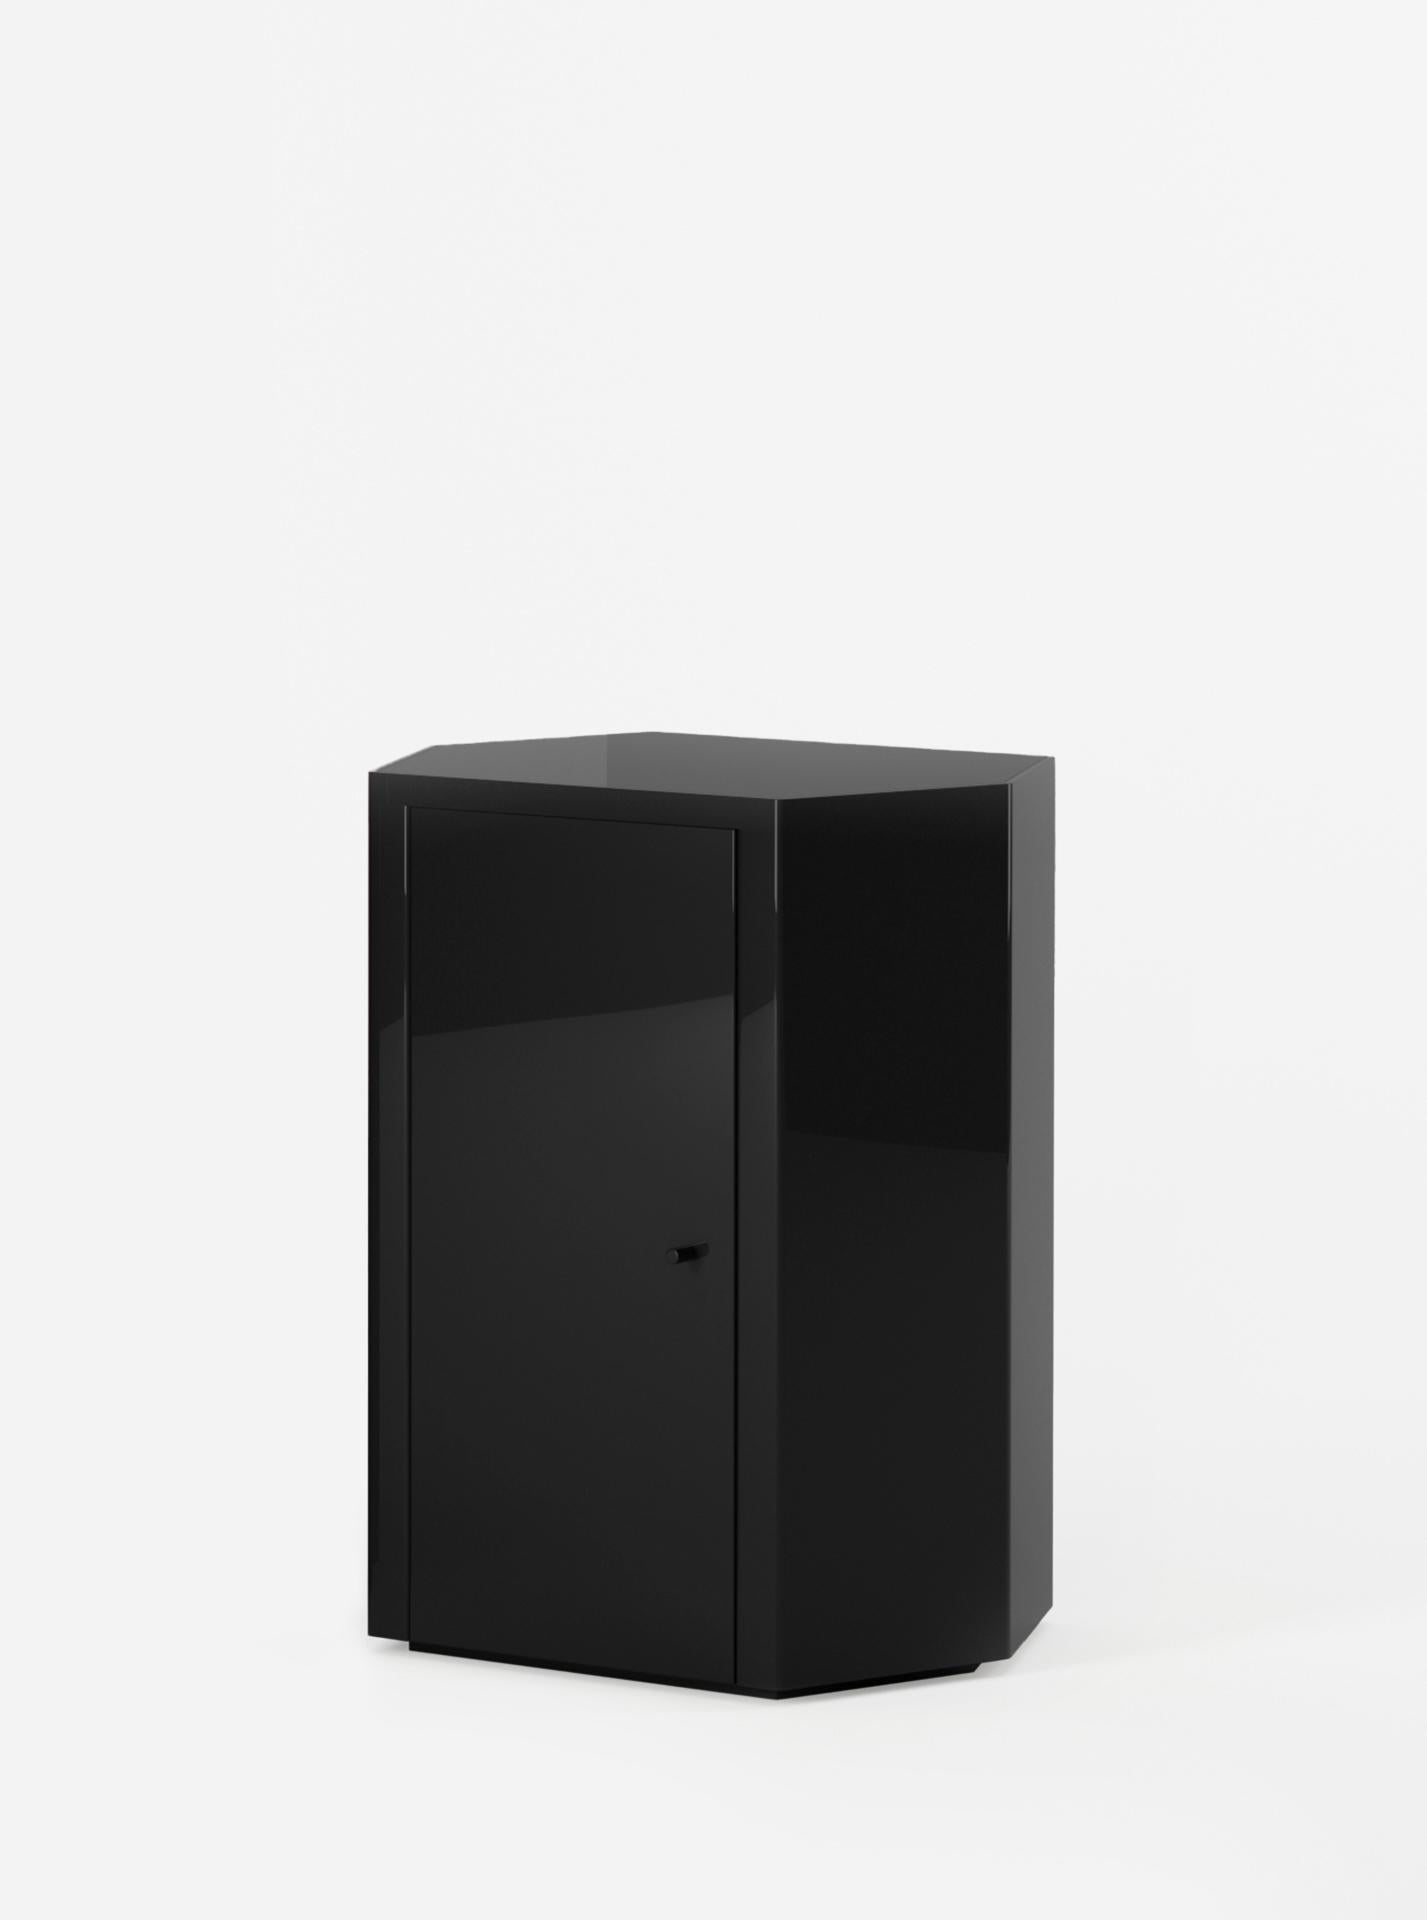 South African Pair of Park Night Stands in Pitch Black Lacquer by Yaniv Chen for Lemon For Sale